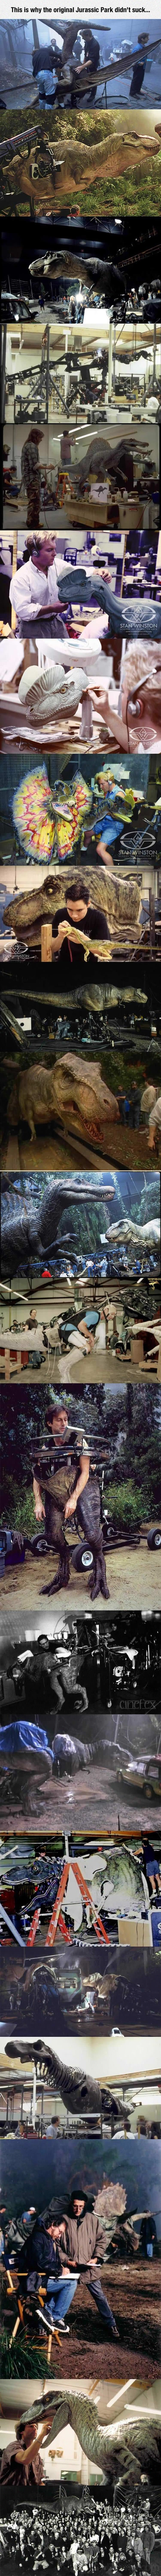 jurassic park funny picture